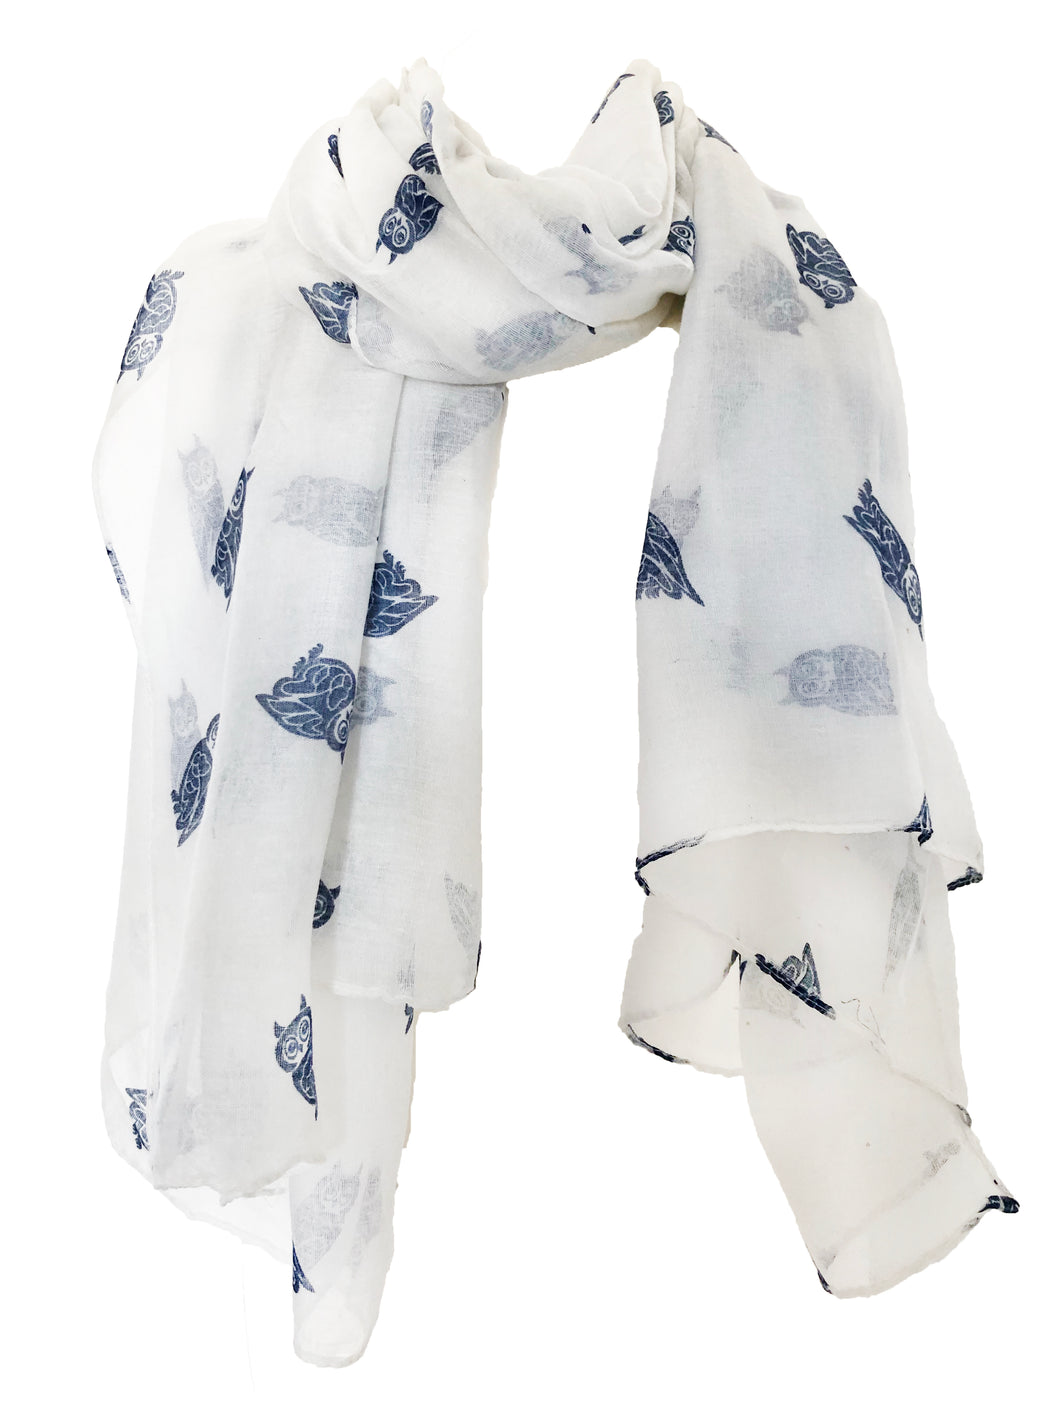 Pamper Yourself Now Cream wth blue owl scarf